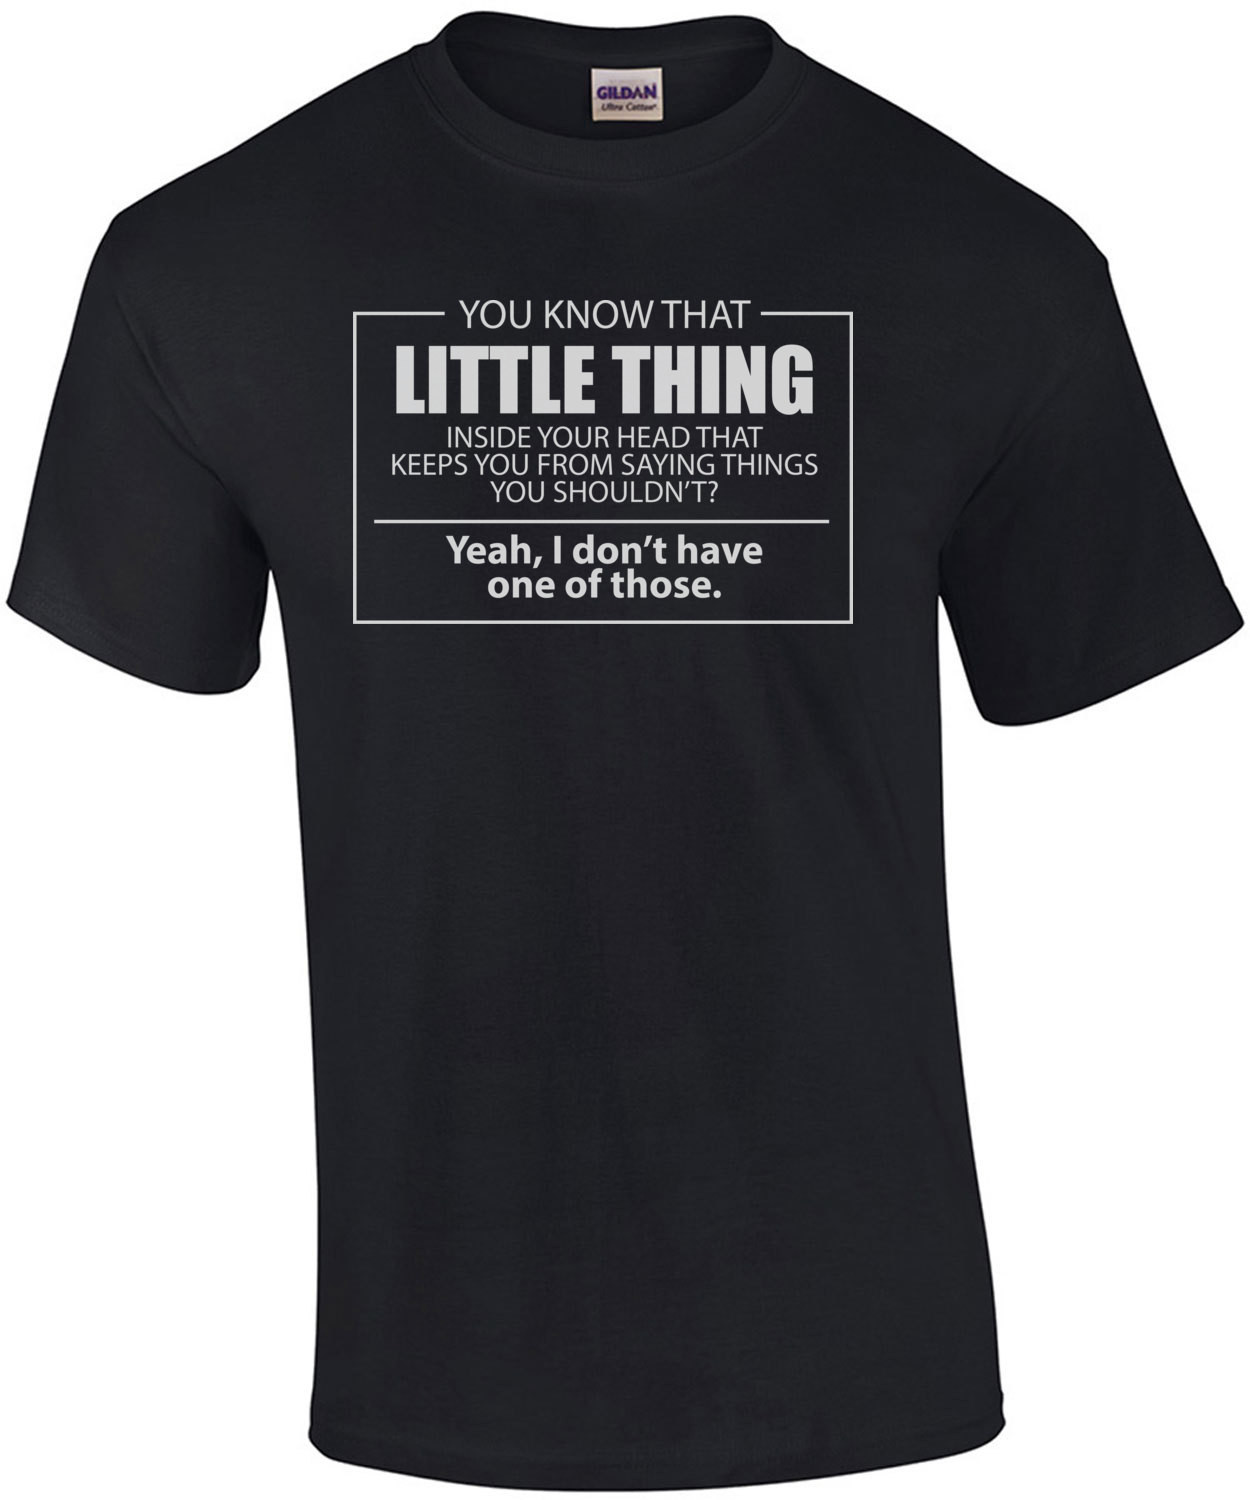 You know that little thing inside your head - Funny T-Shirt